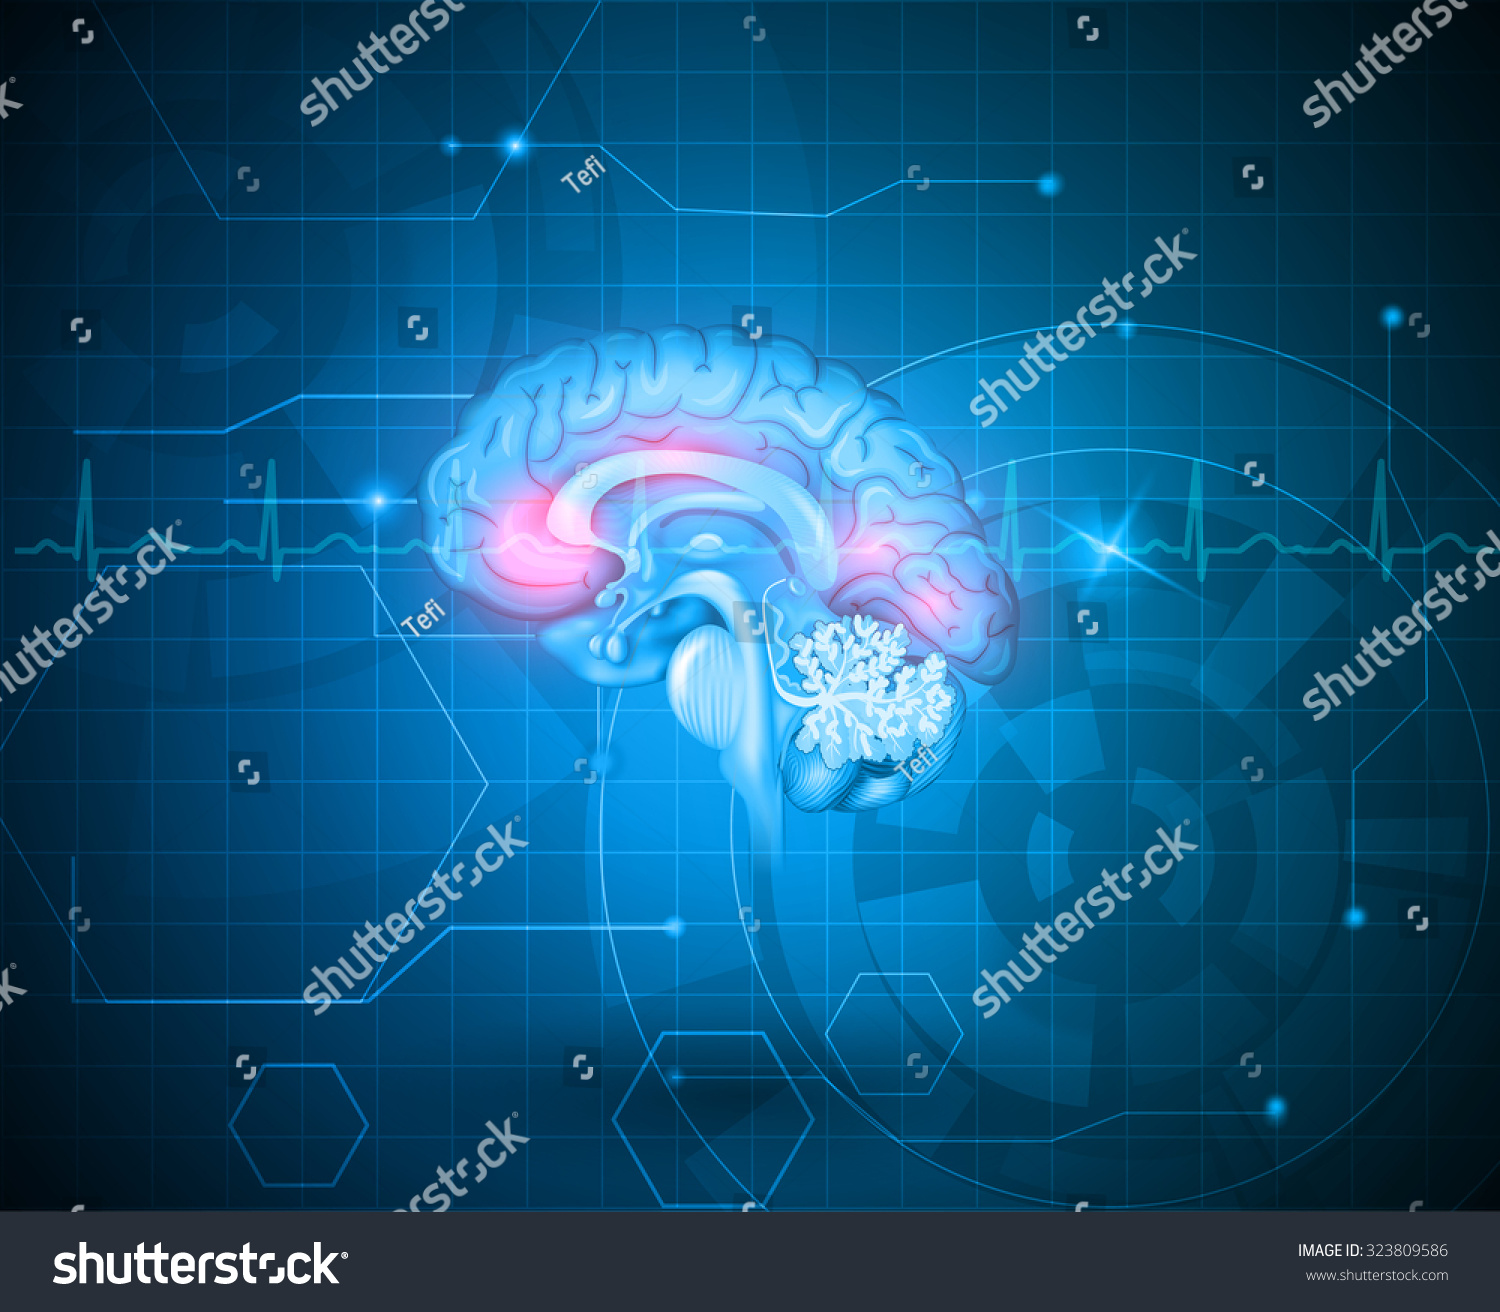 Human Brain Treatment Concept. Abstract Blue Technology Background With ...